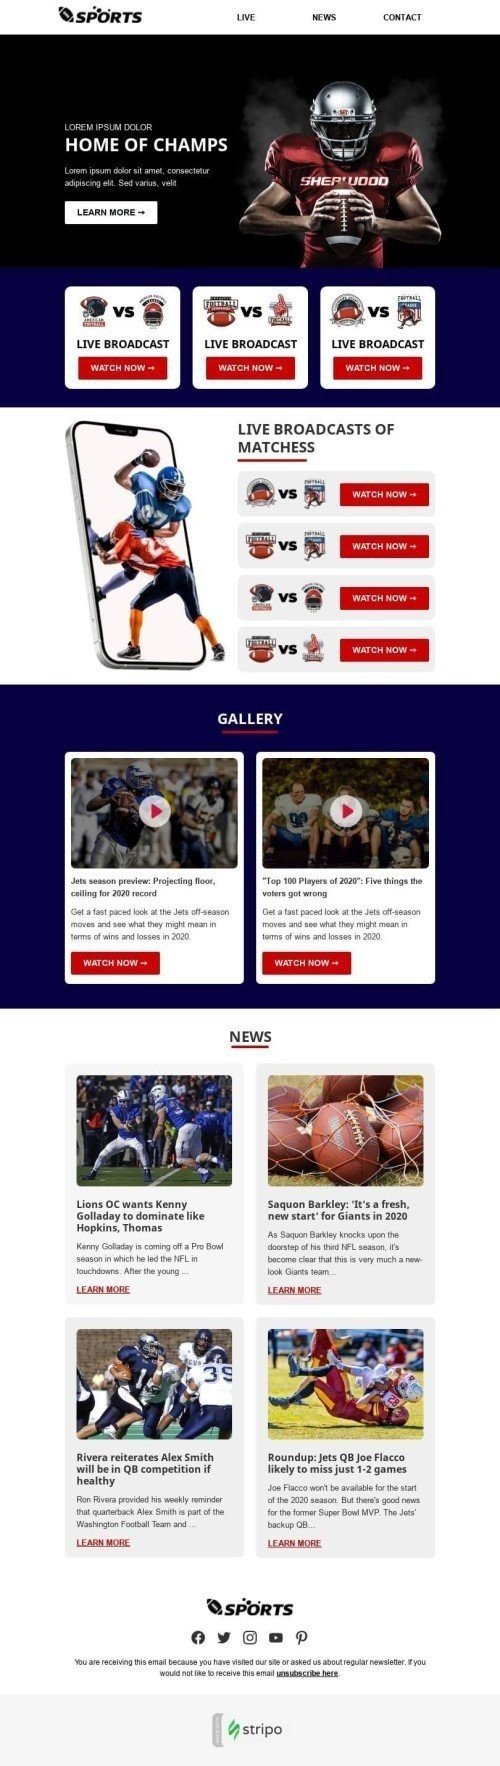 Super Bowl Email Template "Broadcast week" for Sports industry desktop view